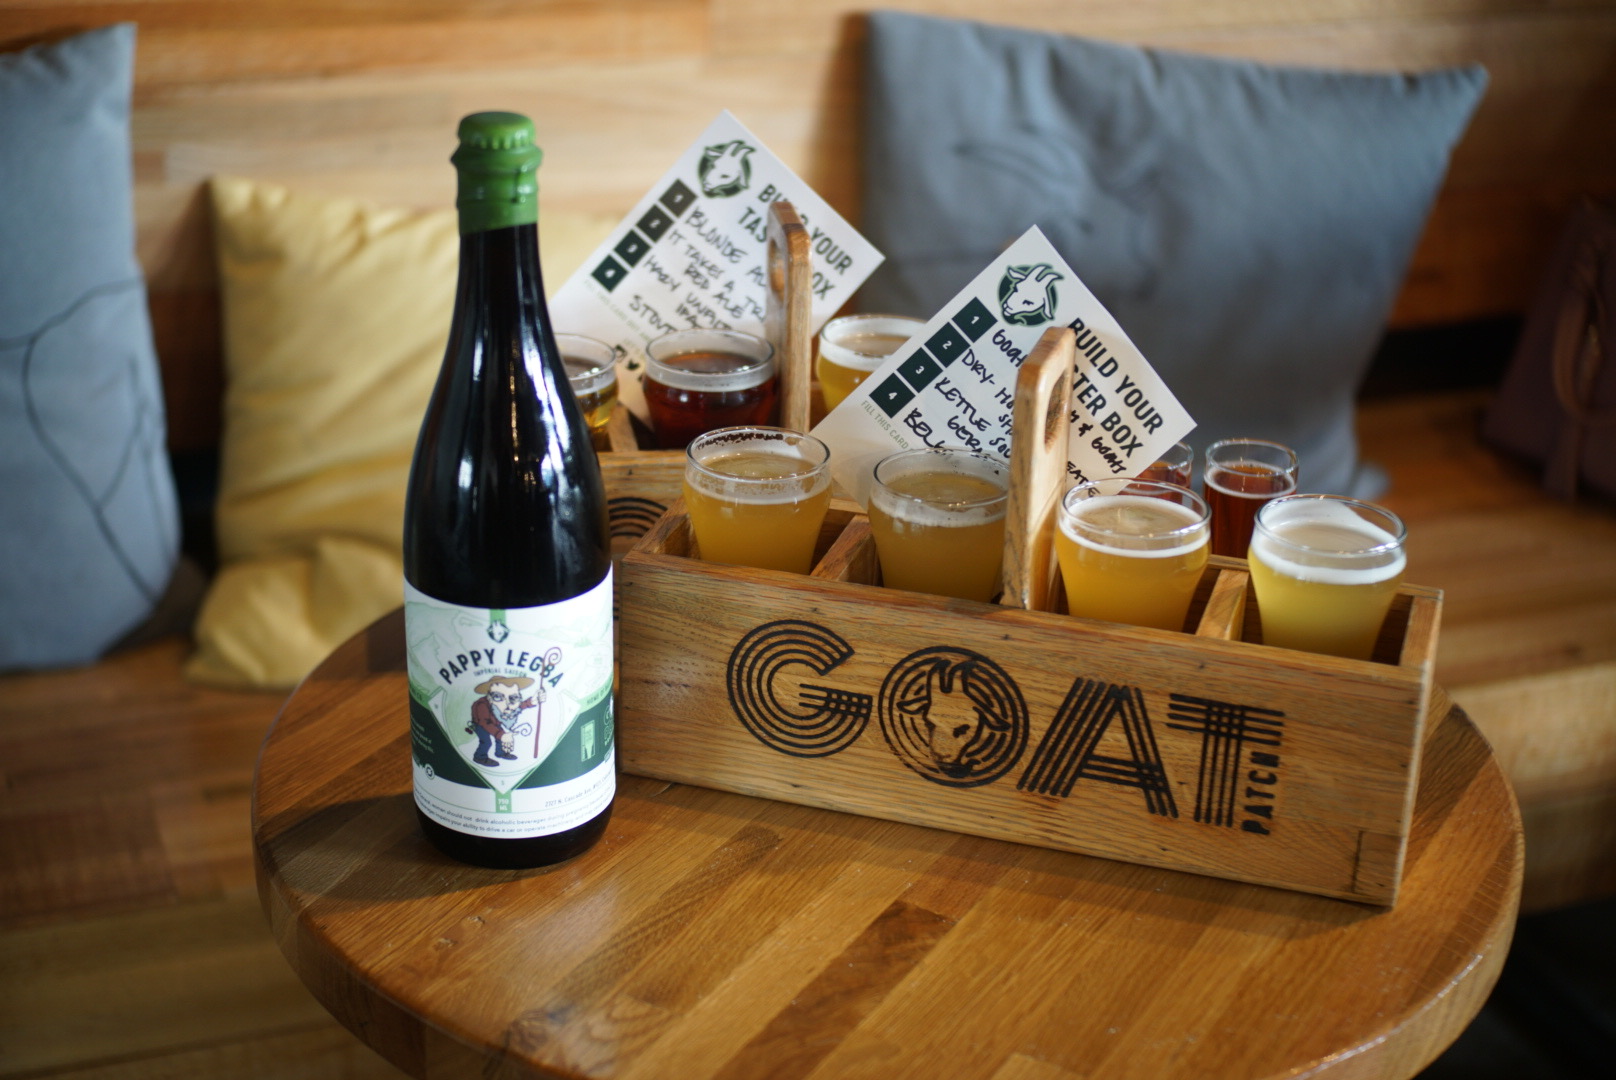 Goat Yoga at Goat Patch Brewing Co.